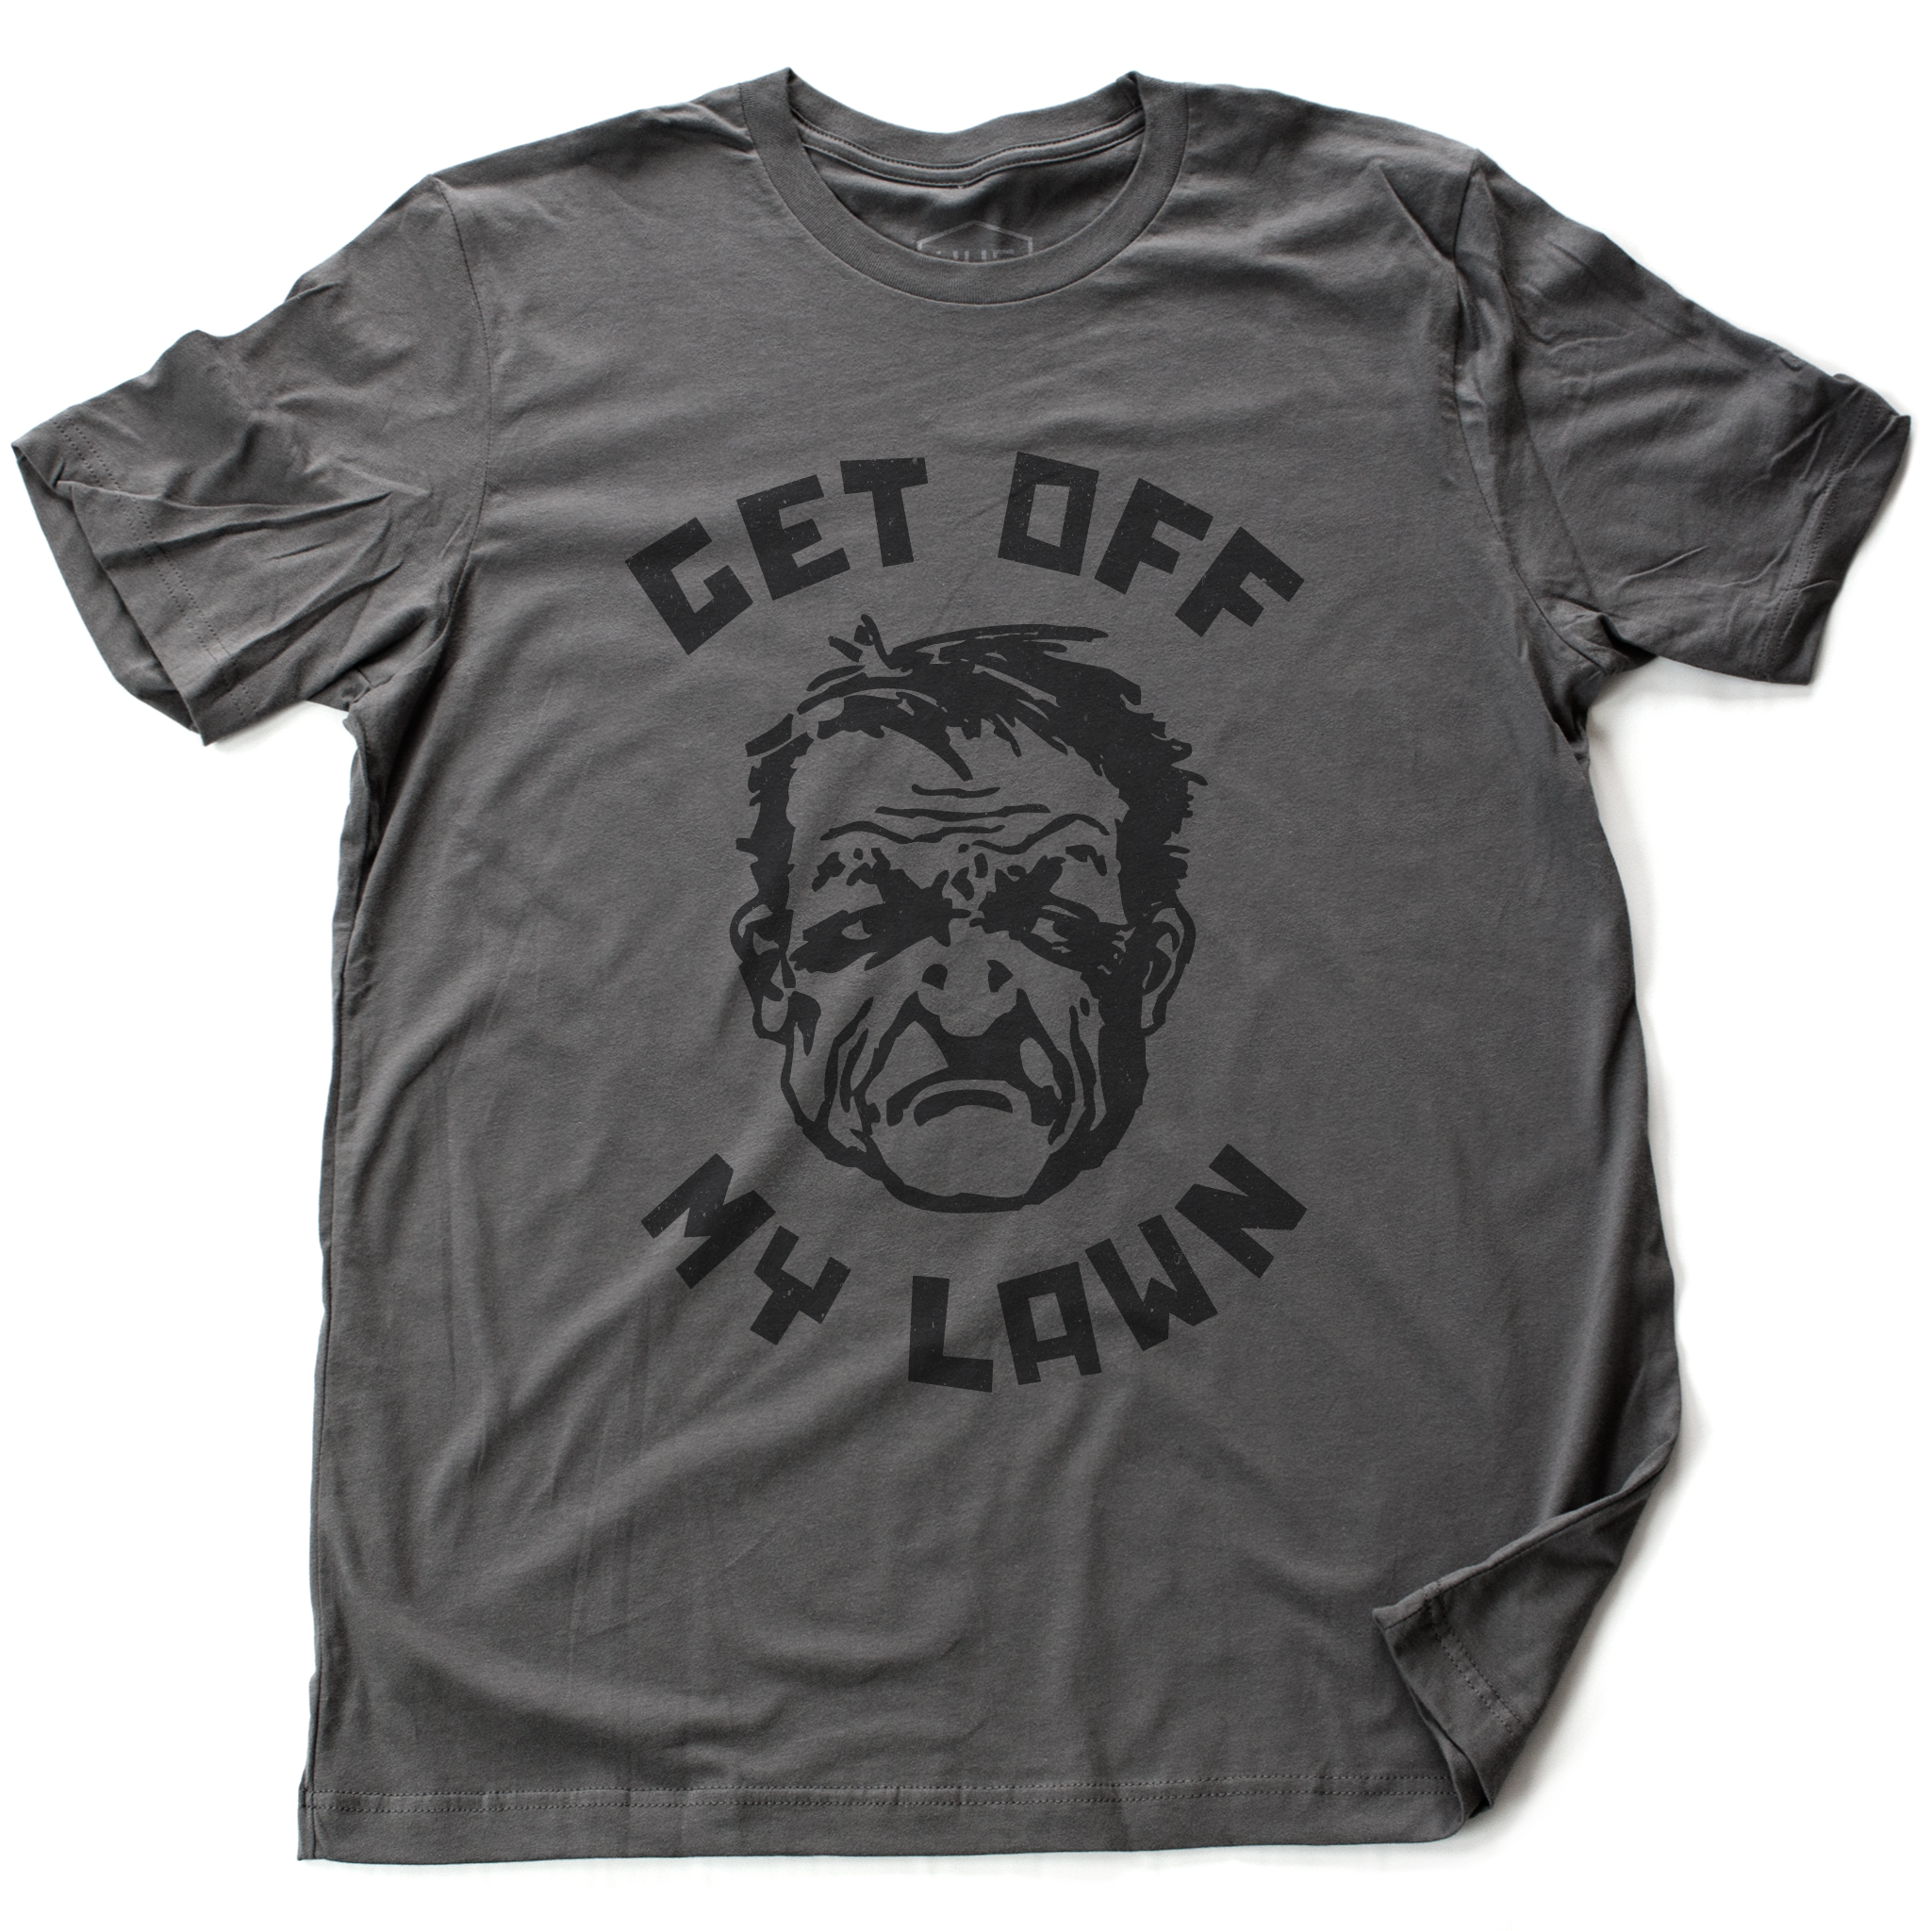 A sarcastic t-shirt in asphalt gray, inspired by the “Get Off My Lawn” meme, featuring a cartoonish angry man and bold typography. From fashion brand YUF, available at wolfsaint.net